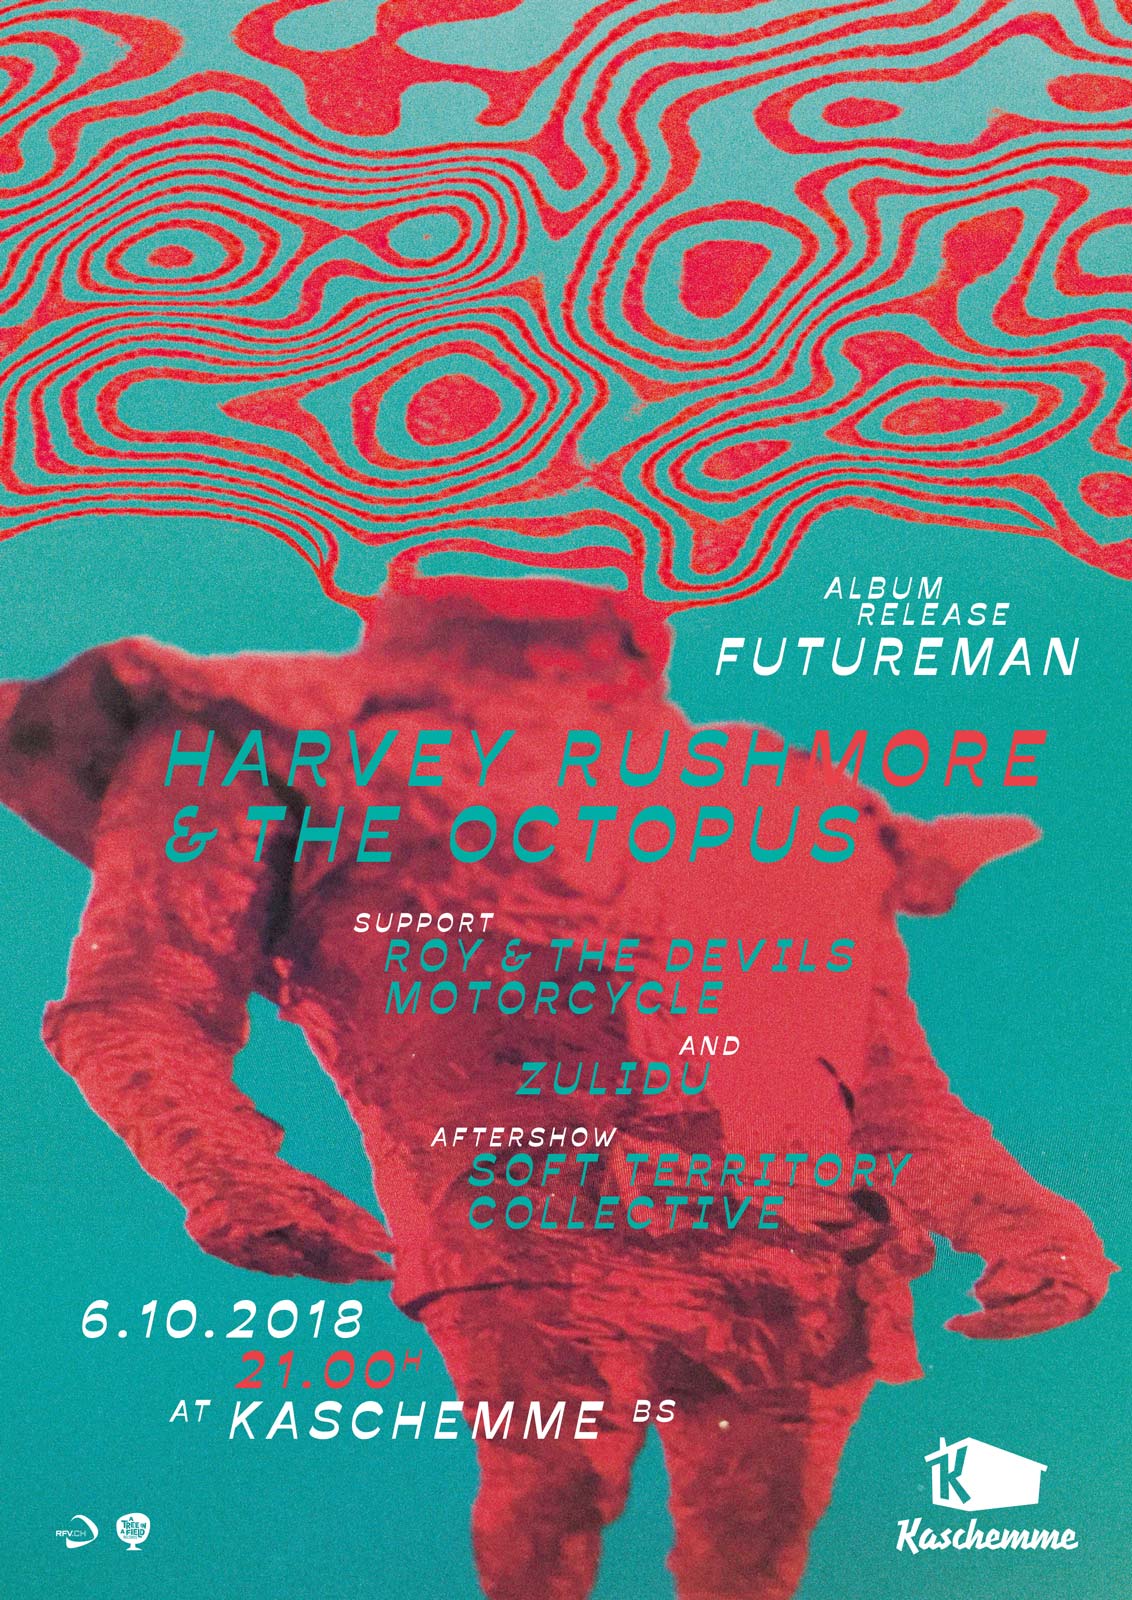 Harvey Rushmore and The Octopus — Futureman Poster